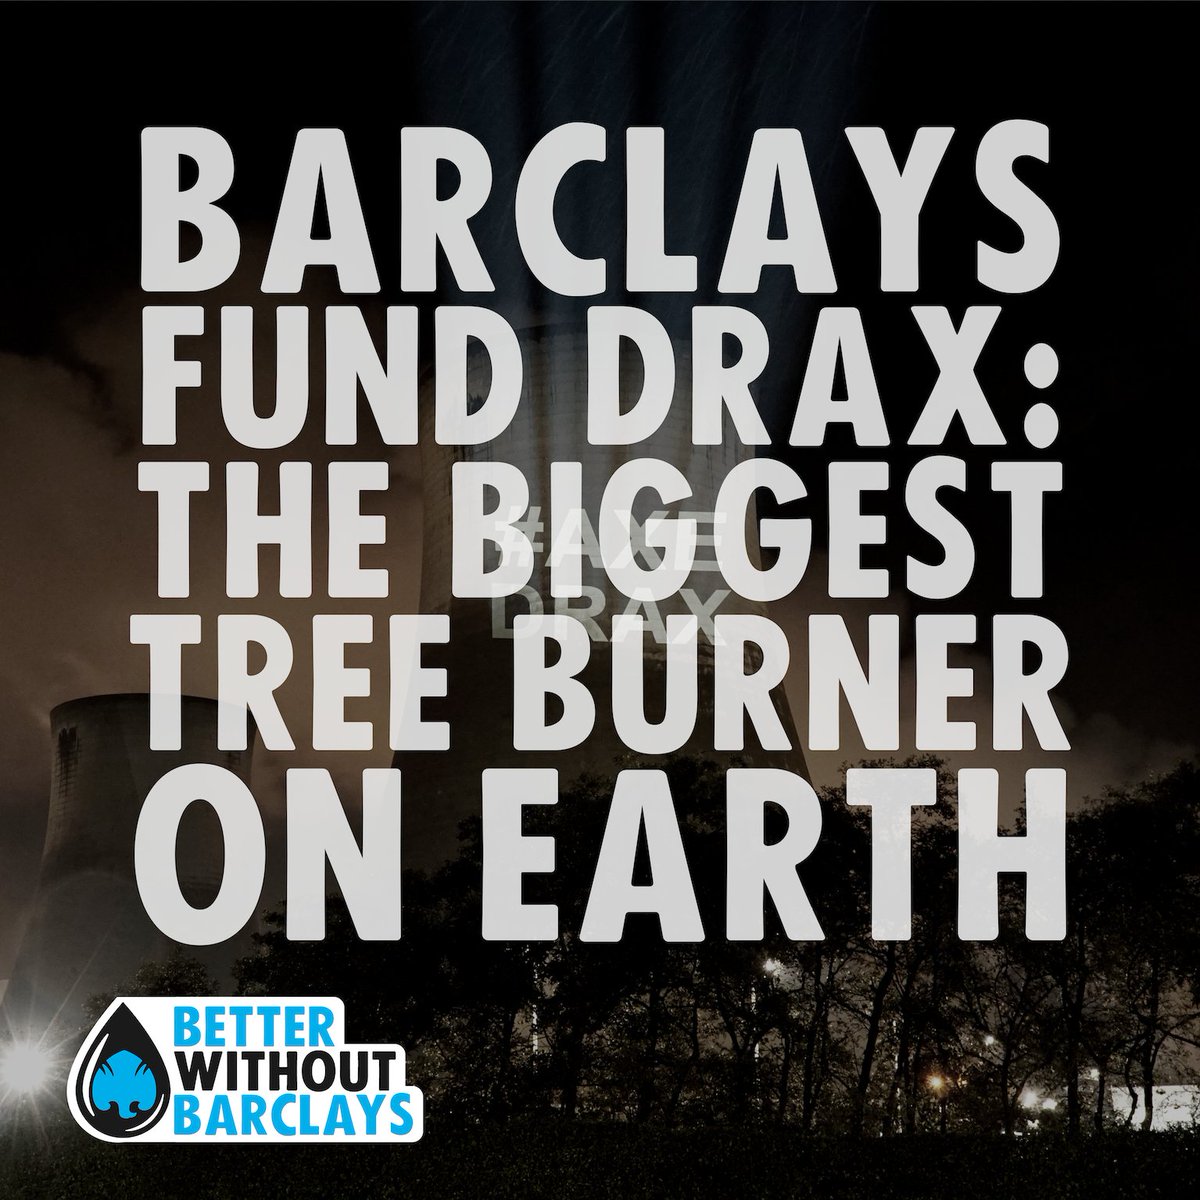 Did you know that #Barclays is a major investor in the UK's single largest carbon emitter & the world's biggest tree burner, Drax? 🌳🏭🔥

It's time for Barclays to stop funding forest destruction & #DropDrax: biofuelwatch.org.uk/2022/defund-cl… 

#BreakUpWithBarclays #BetterWithoutBarclays